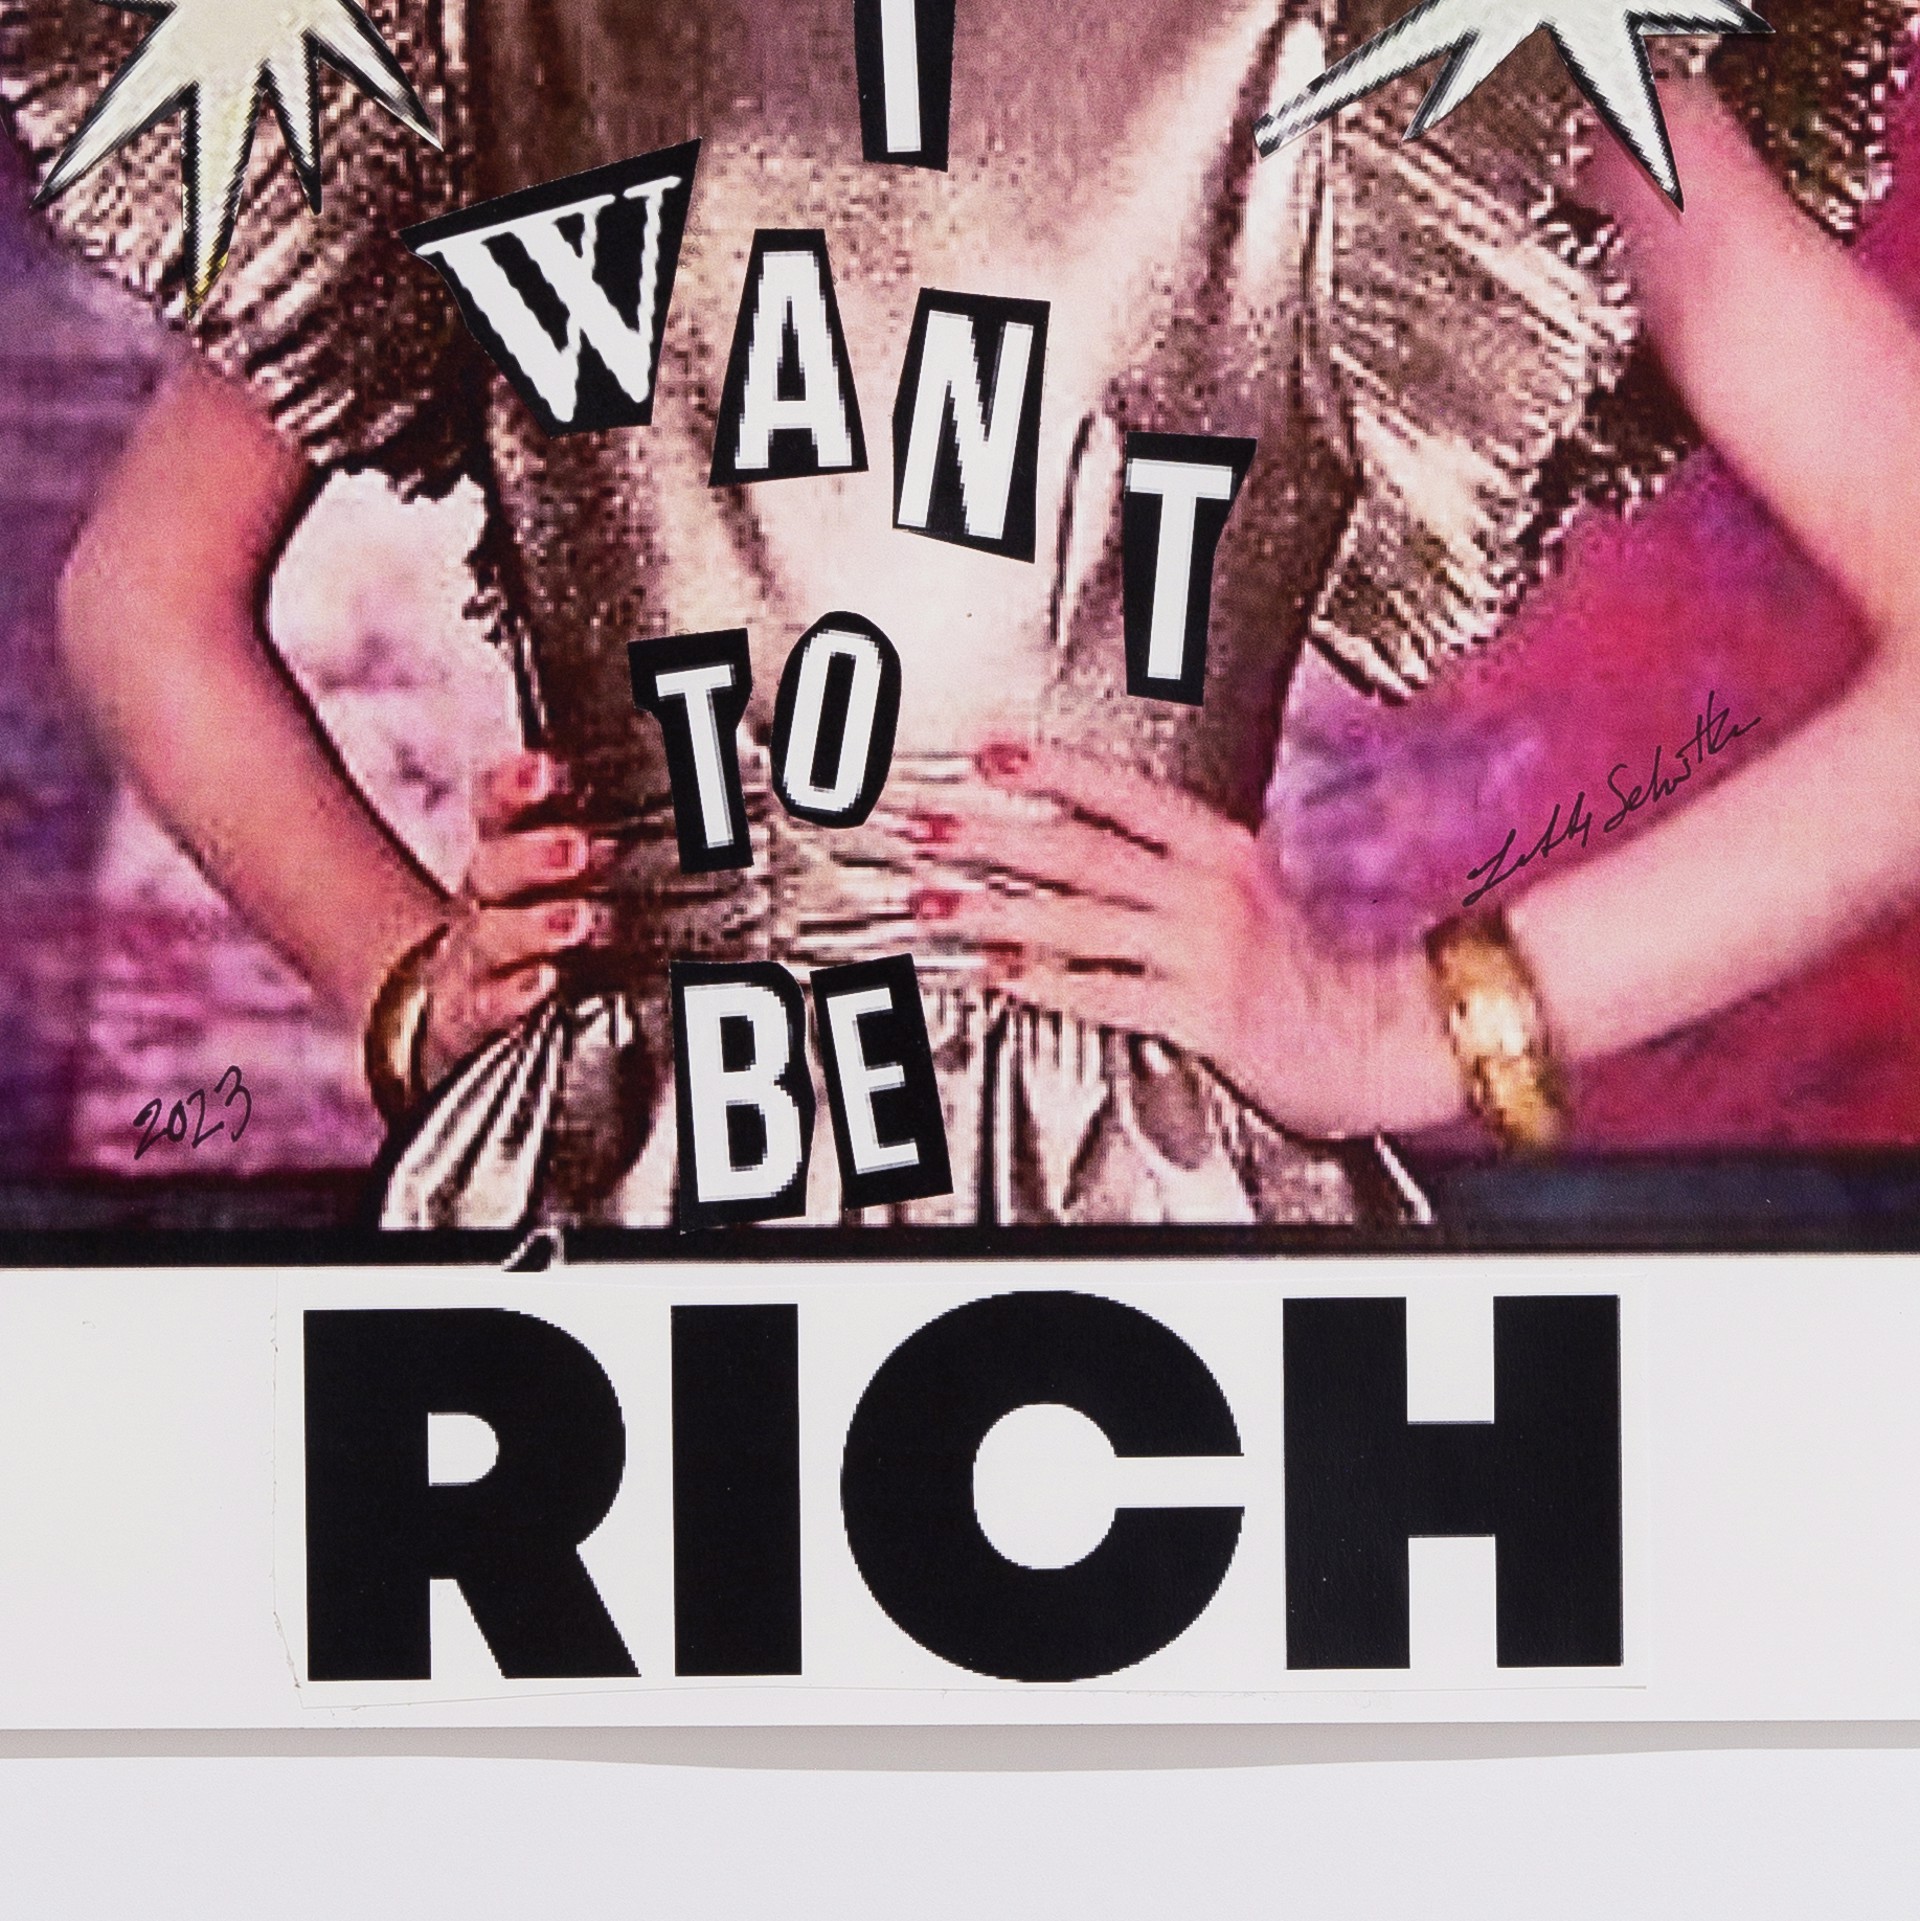 I Want To Be Rich by PhoebeNewYork